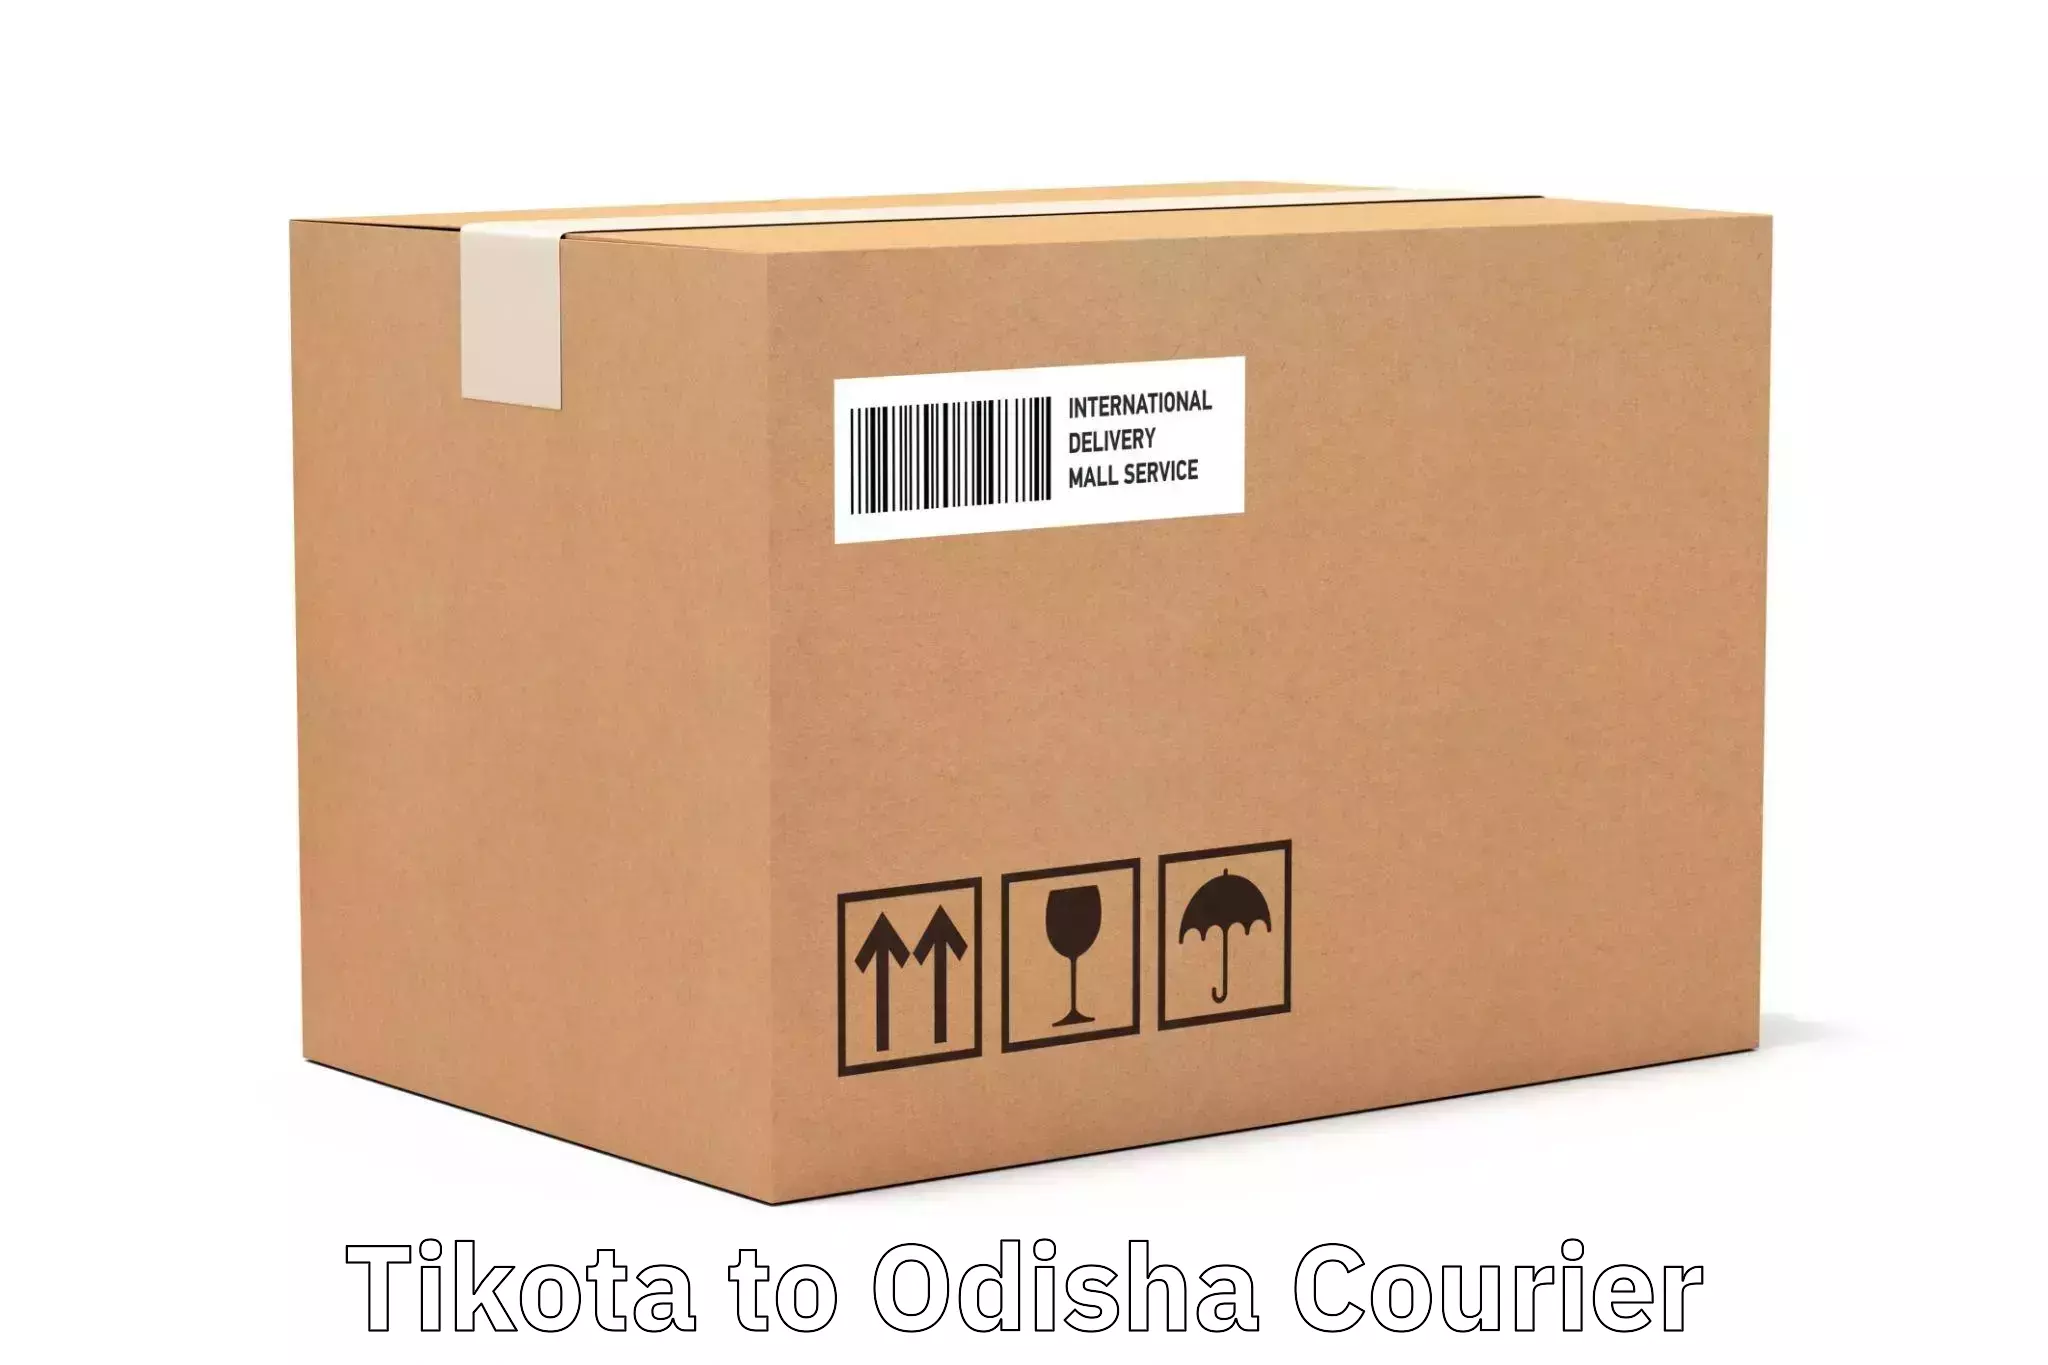 State-of-the-art courier technology in Tikota to Odisha